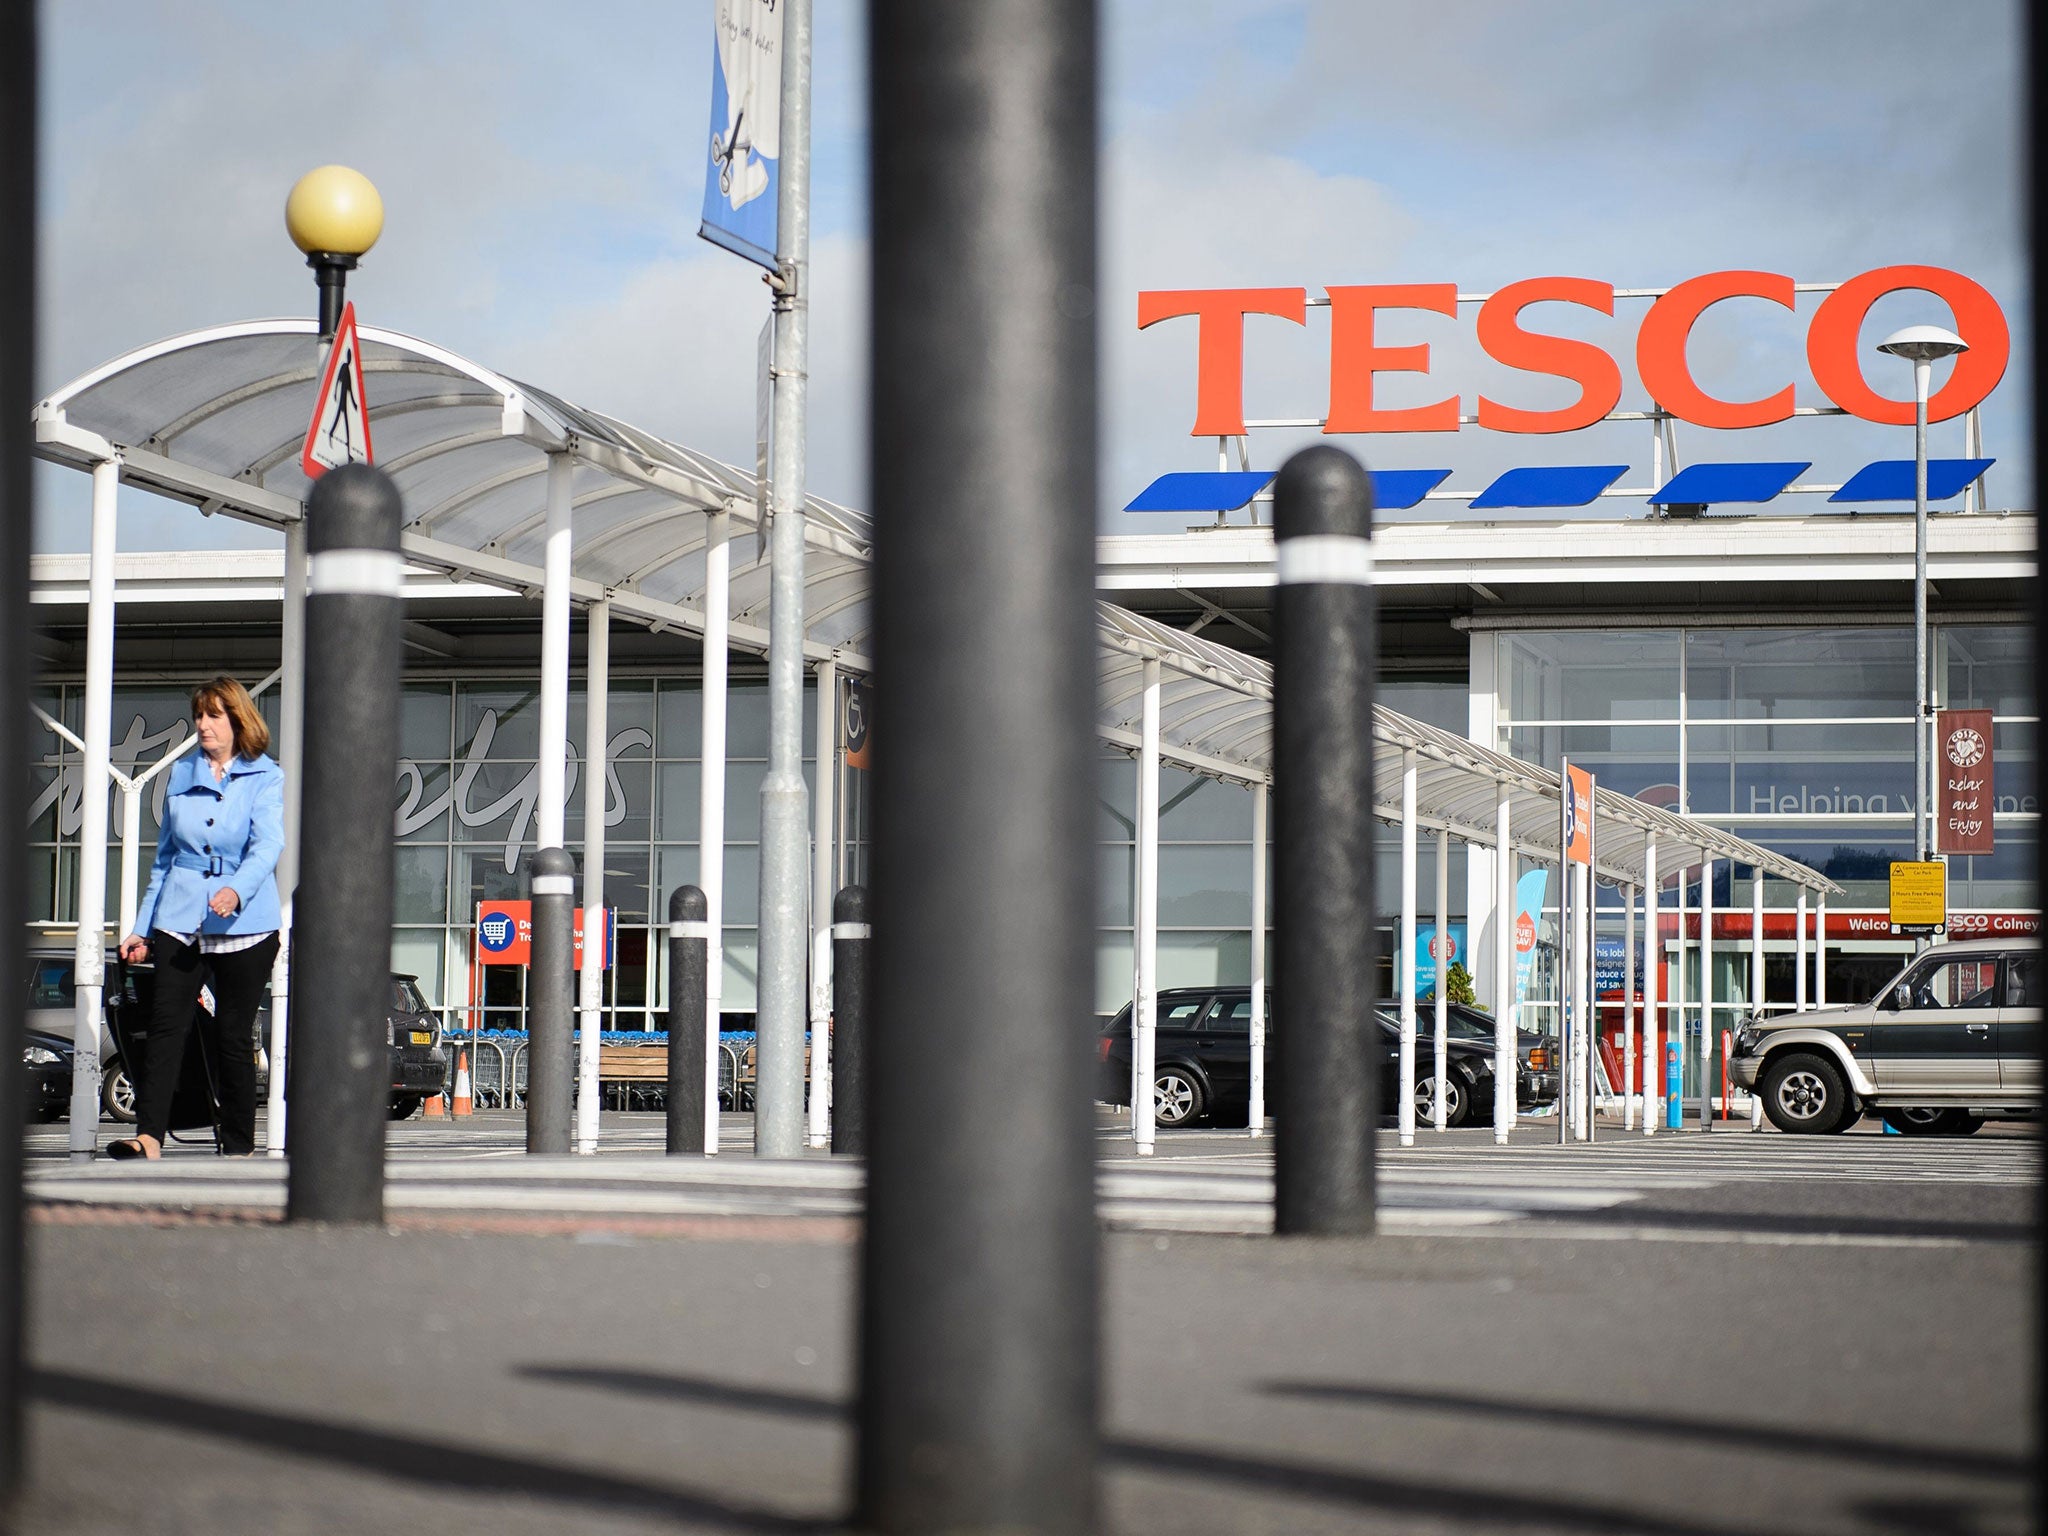 Dave Lewis becomes the first outsider to take on the mantel of Tesco chief executive on Monday